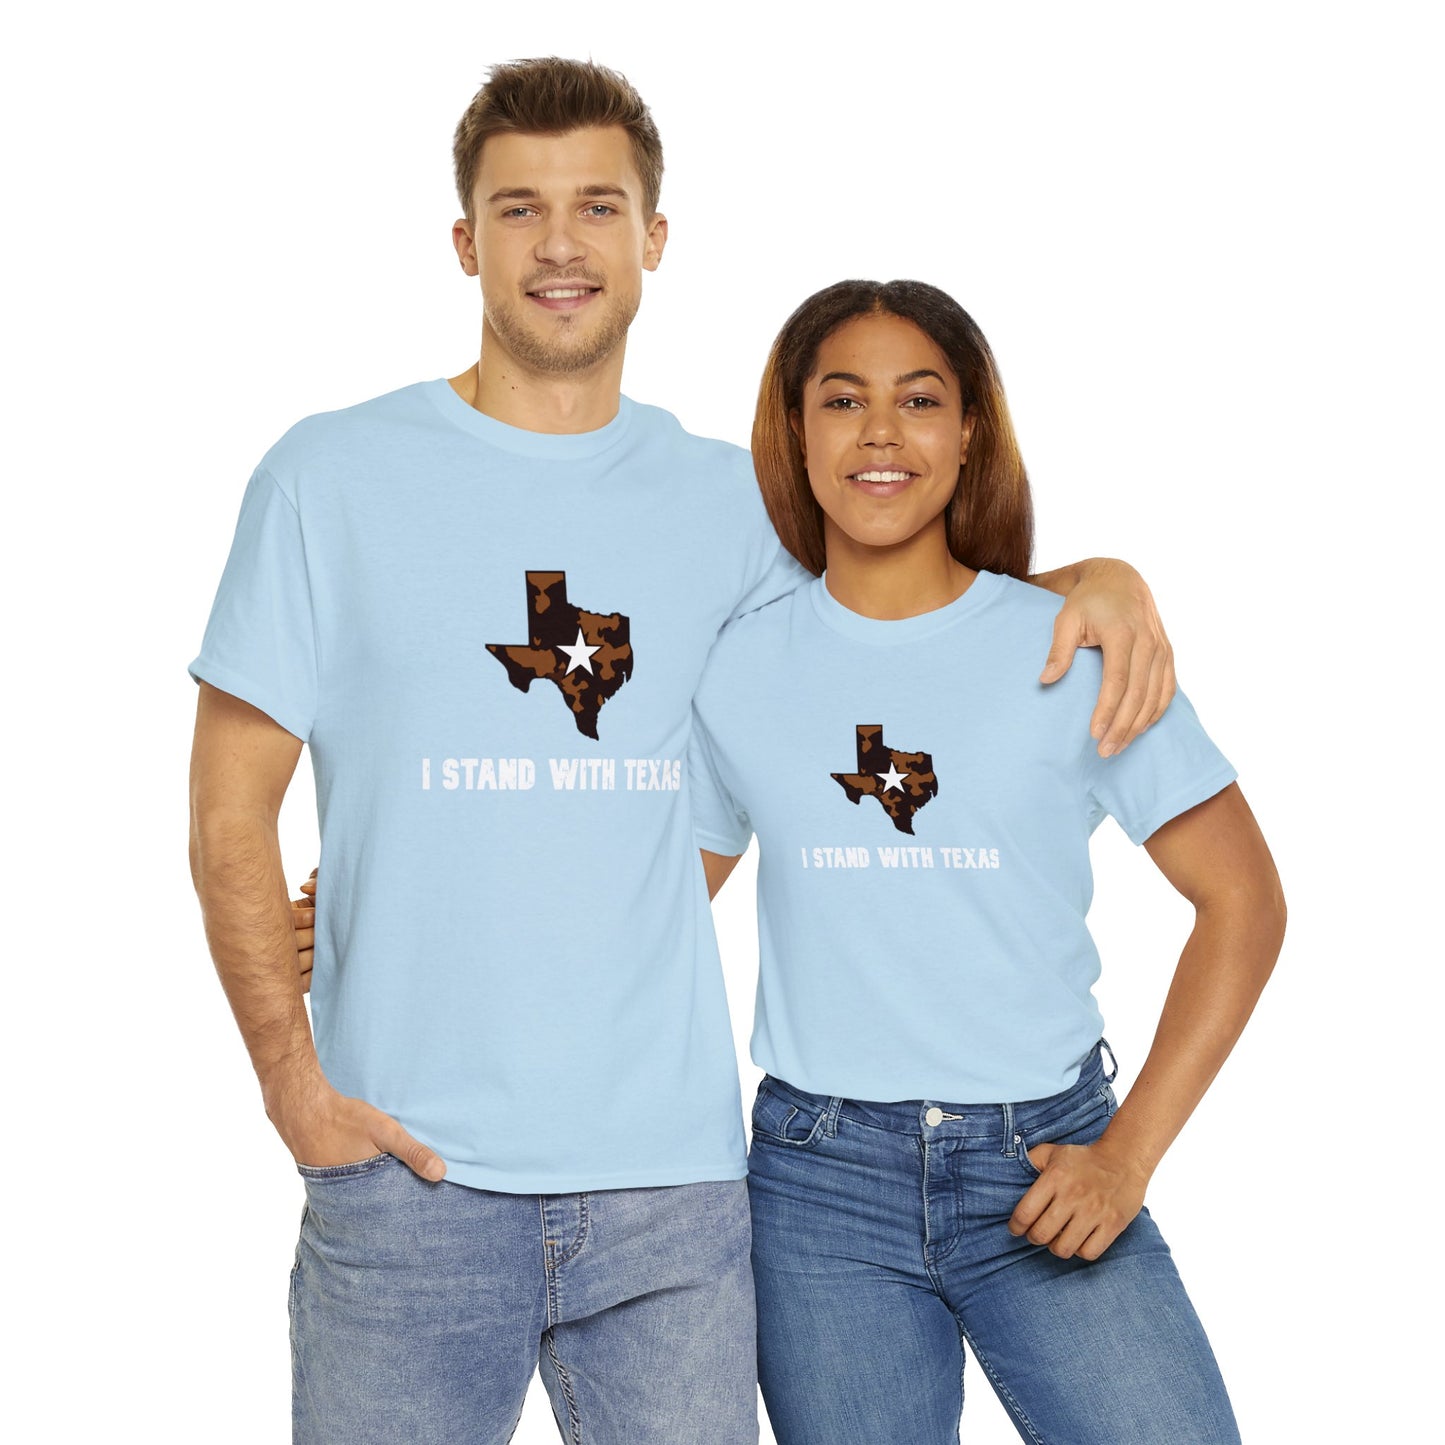 I Stand With Texas Unisex Heavy Cotton Tee